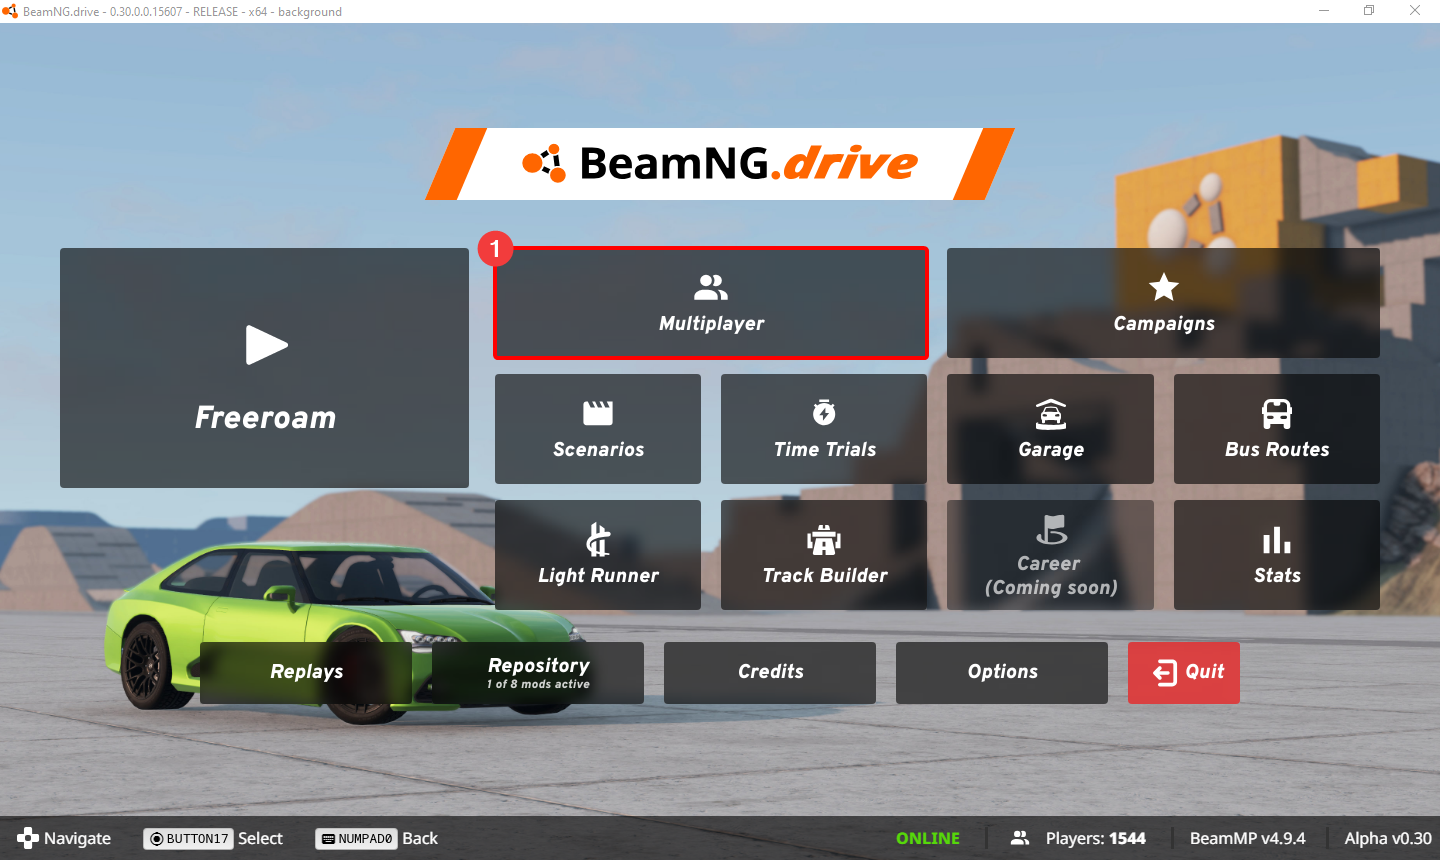 BeamNG.drive Main Menu, with Multiplayer option highlighted